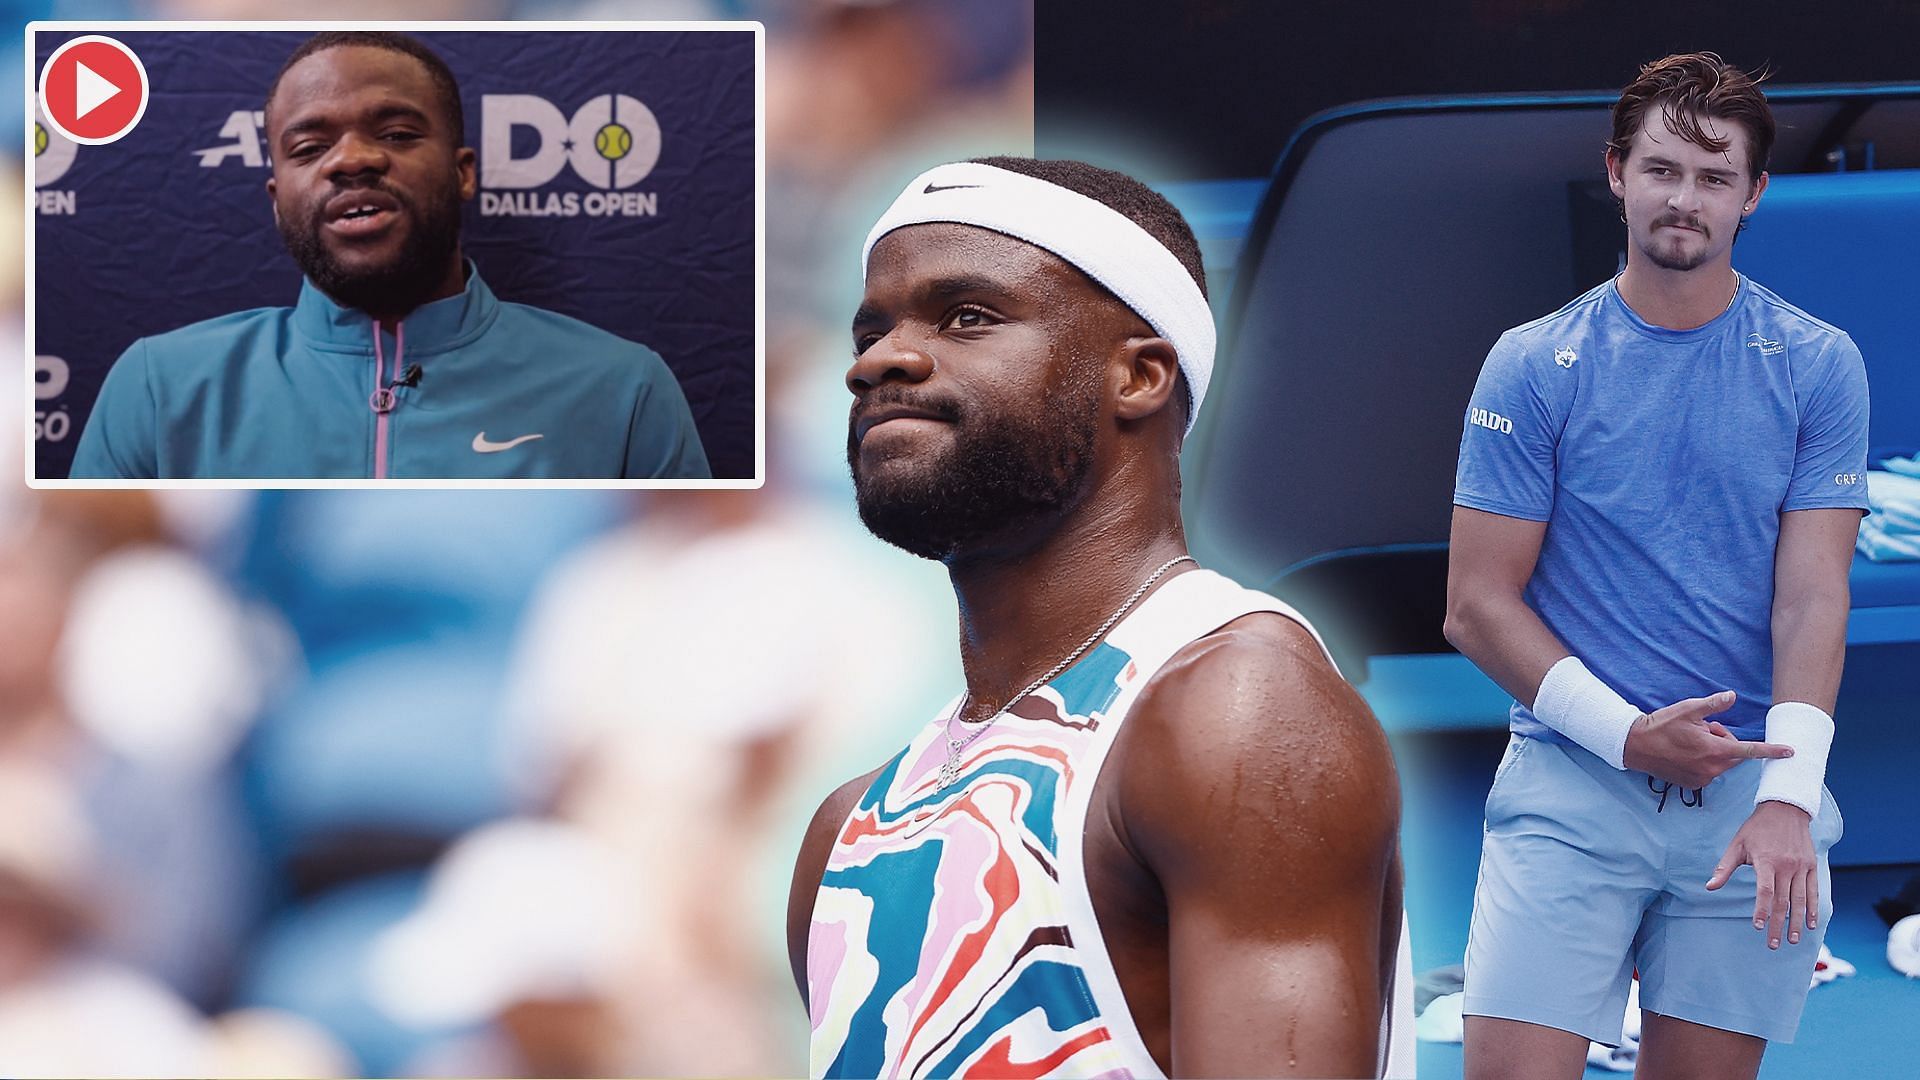 Frances Tiafoe and JJ Wolf feature in new Dallas Open promotional video